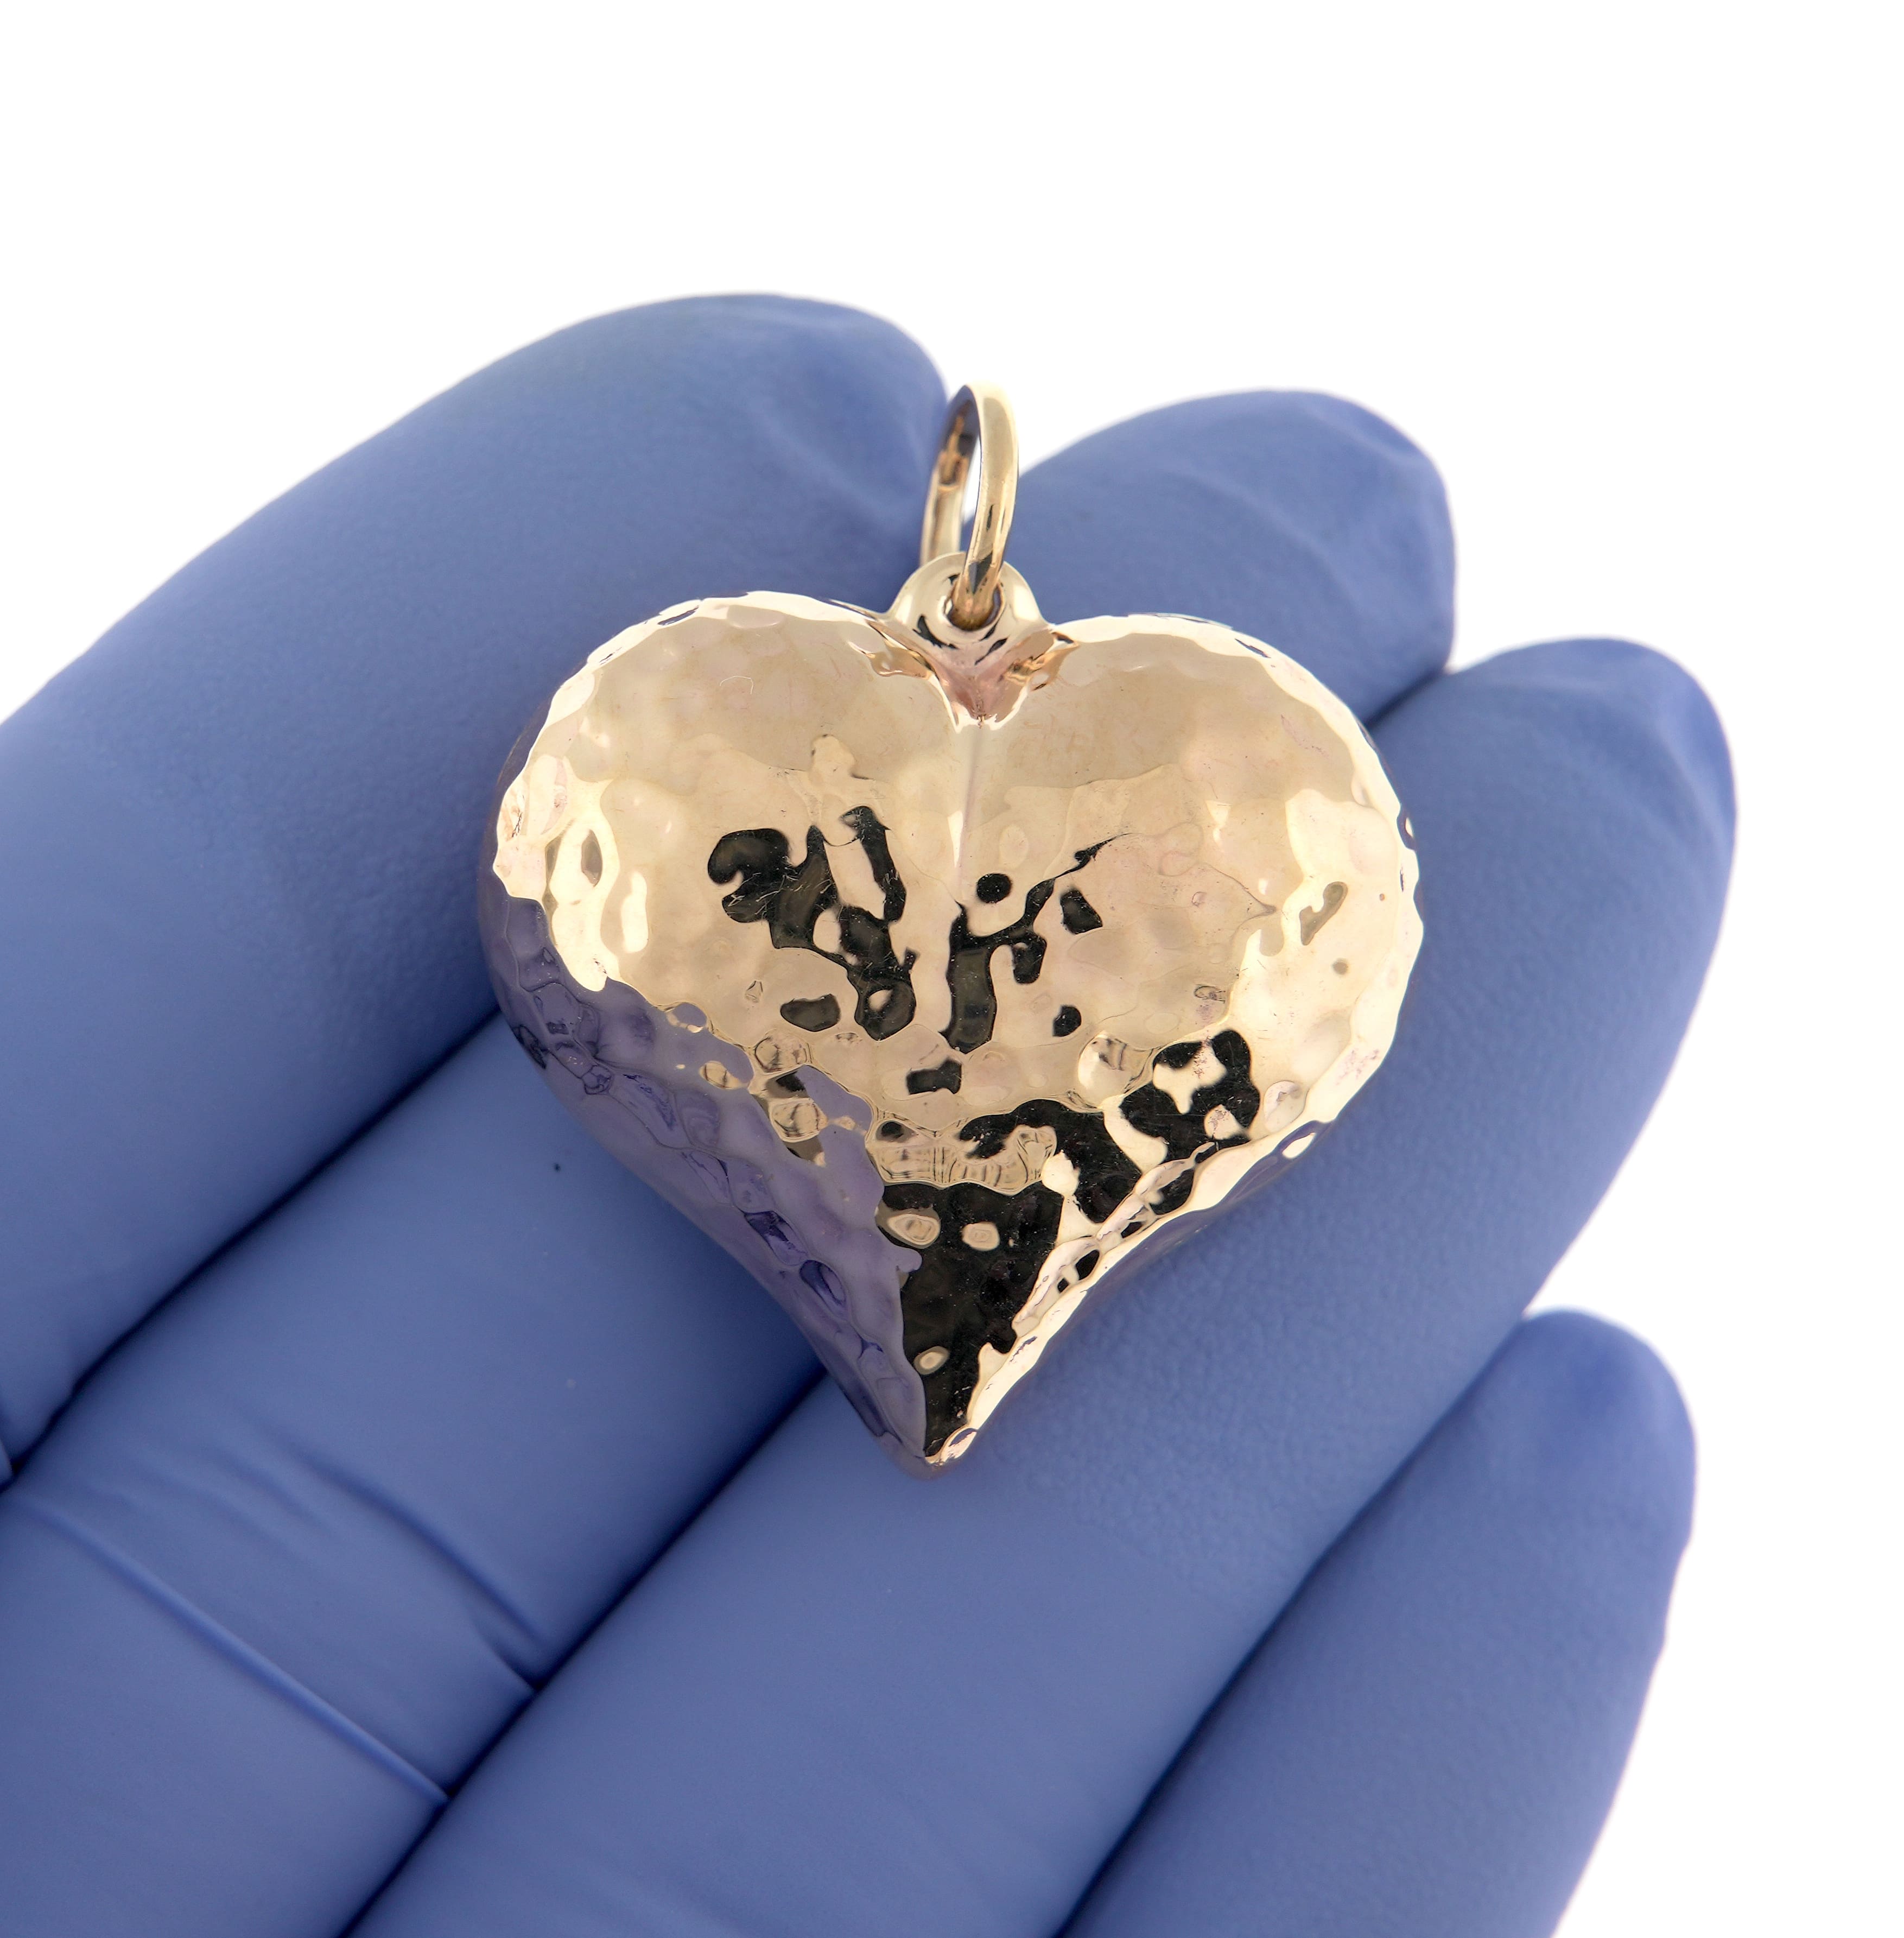 14k Yellow Gold Hammered Heart Charm Holder Necklace